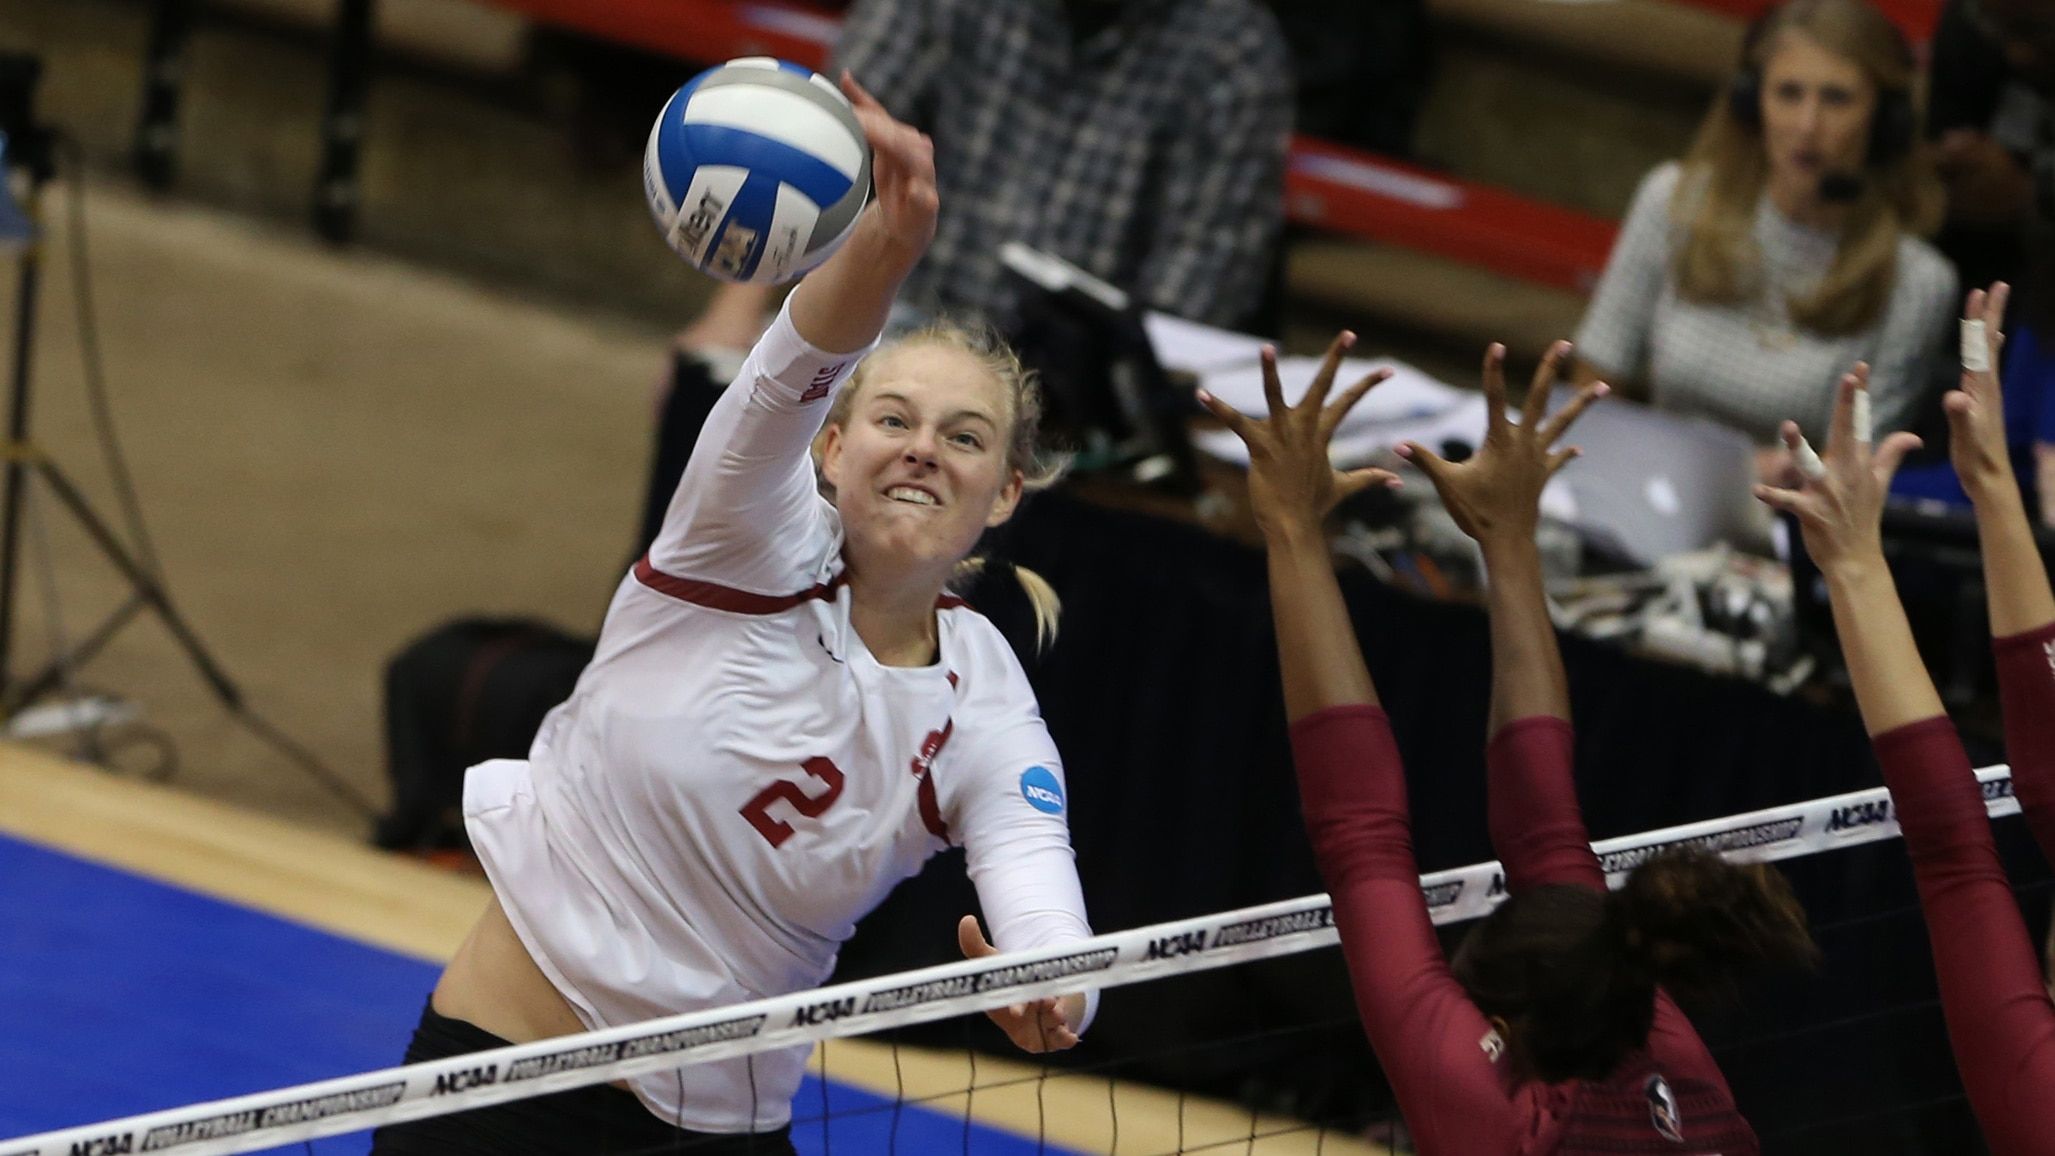 Who are the top women's volleyball players to watch in 2019?